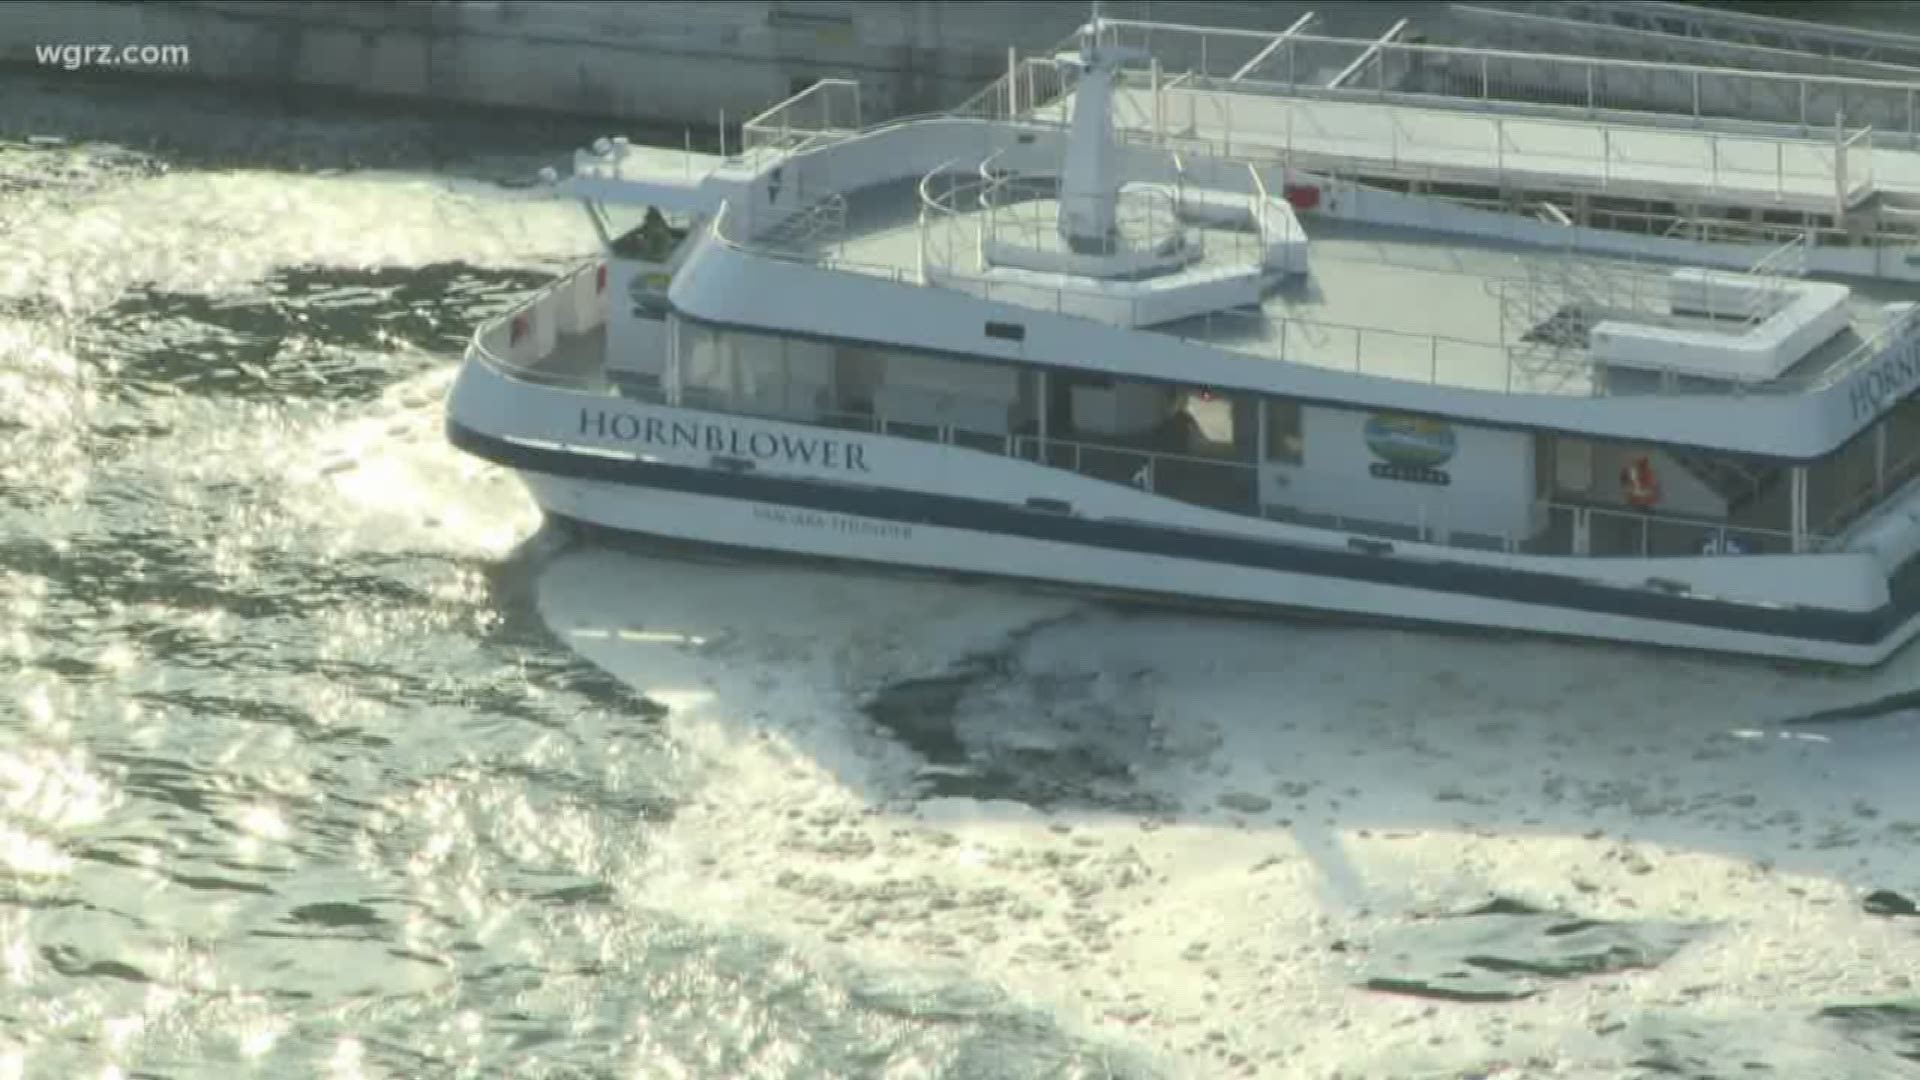 The mild weather and lack of ice in the Niagara River is making a March 28th start possible.